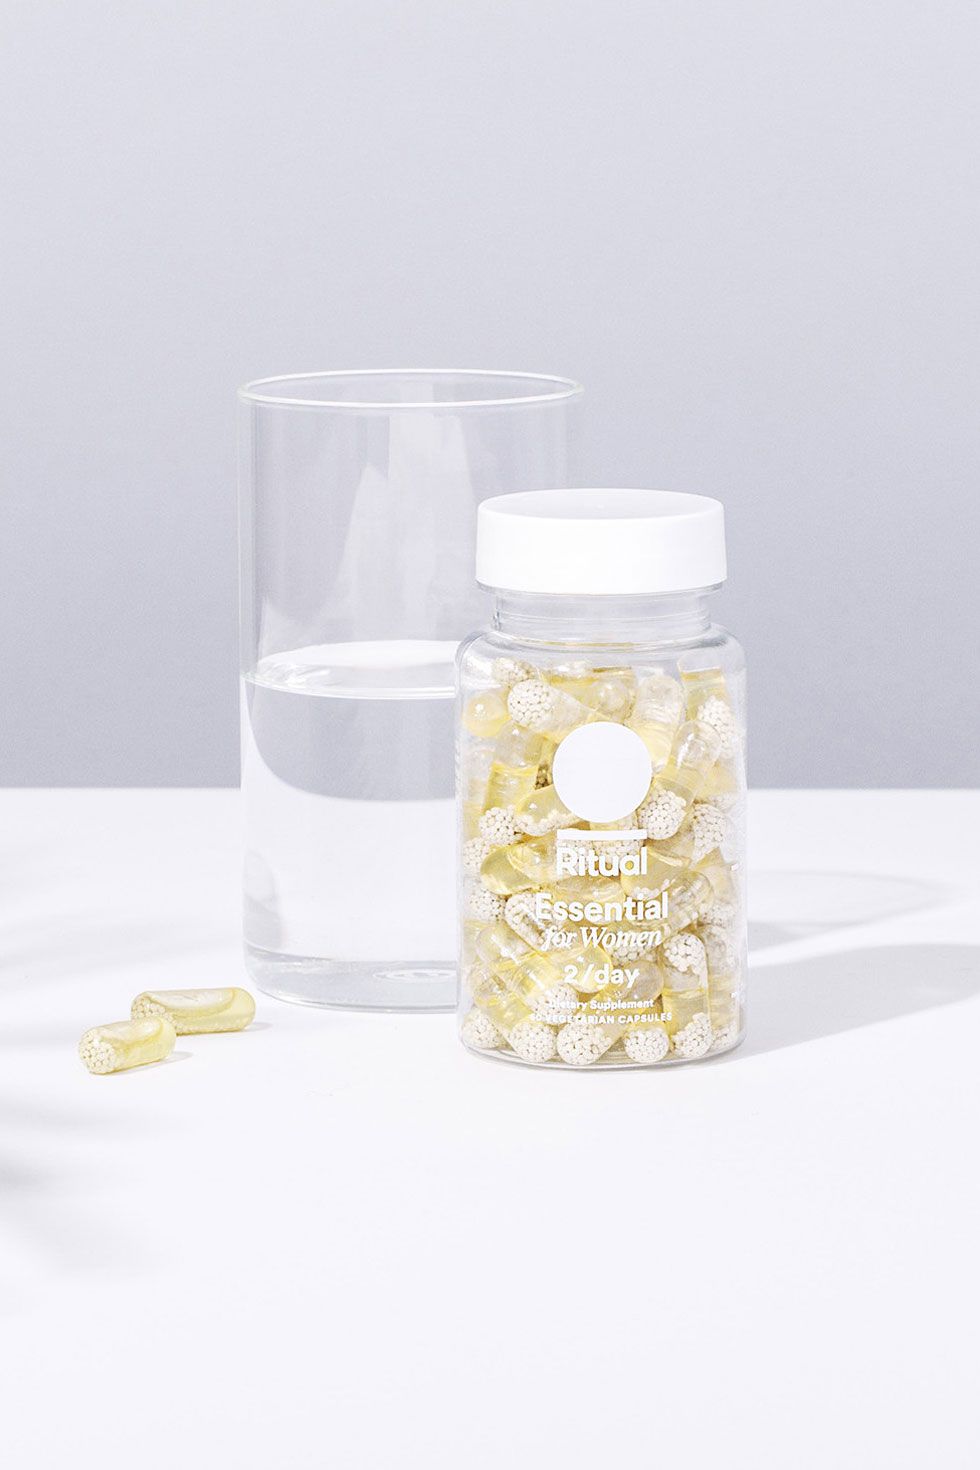 <p>This year saw a crop of new multivitamin startups aiming to disrupt an industry that has so long neglected aesthetics and consumer transparency. <a href="https://ritual.com/" target="_blank" data-tracking-id="recirc-text-link">Ritual vitamins</a> (shown at left) claim to boost energy levels and improve nutrition all while being vegan, non-GMO, and free of allergens. </p>